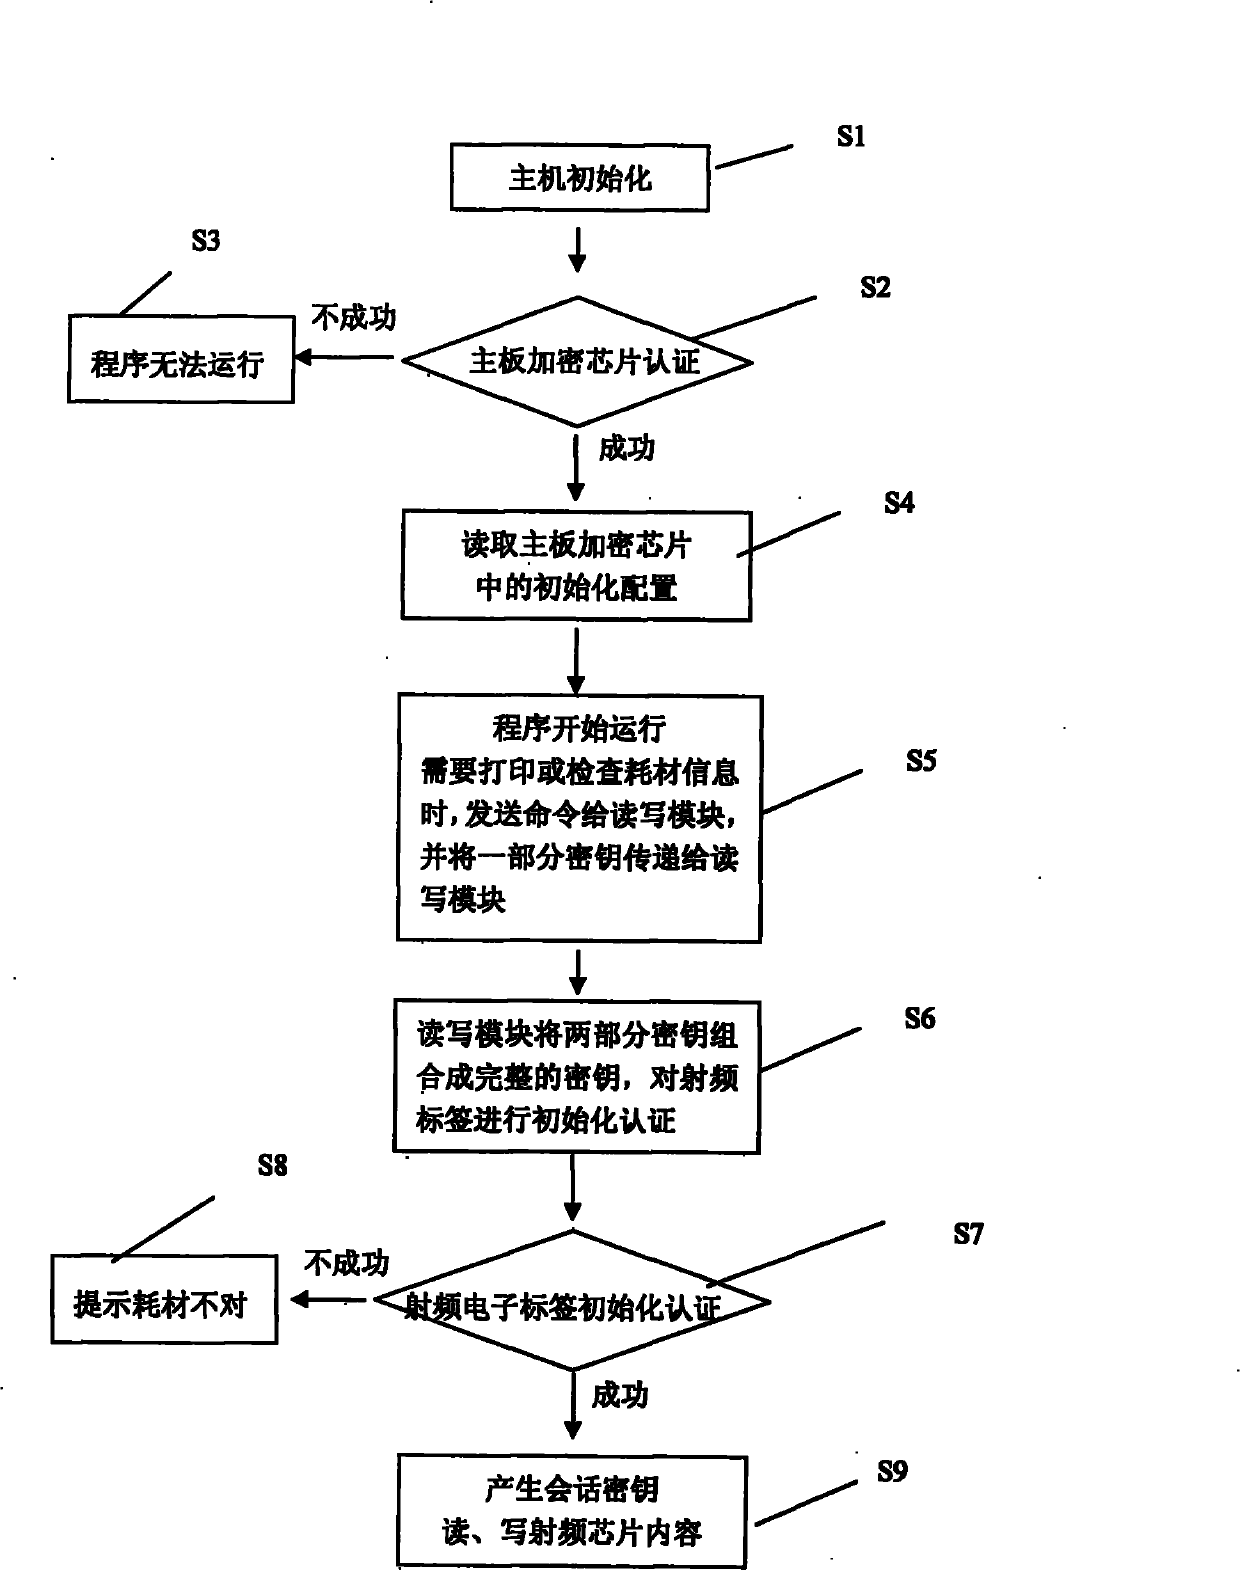 Method for encrypting consumable items through radio frequency identification electronic tag